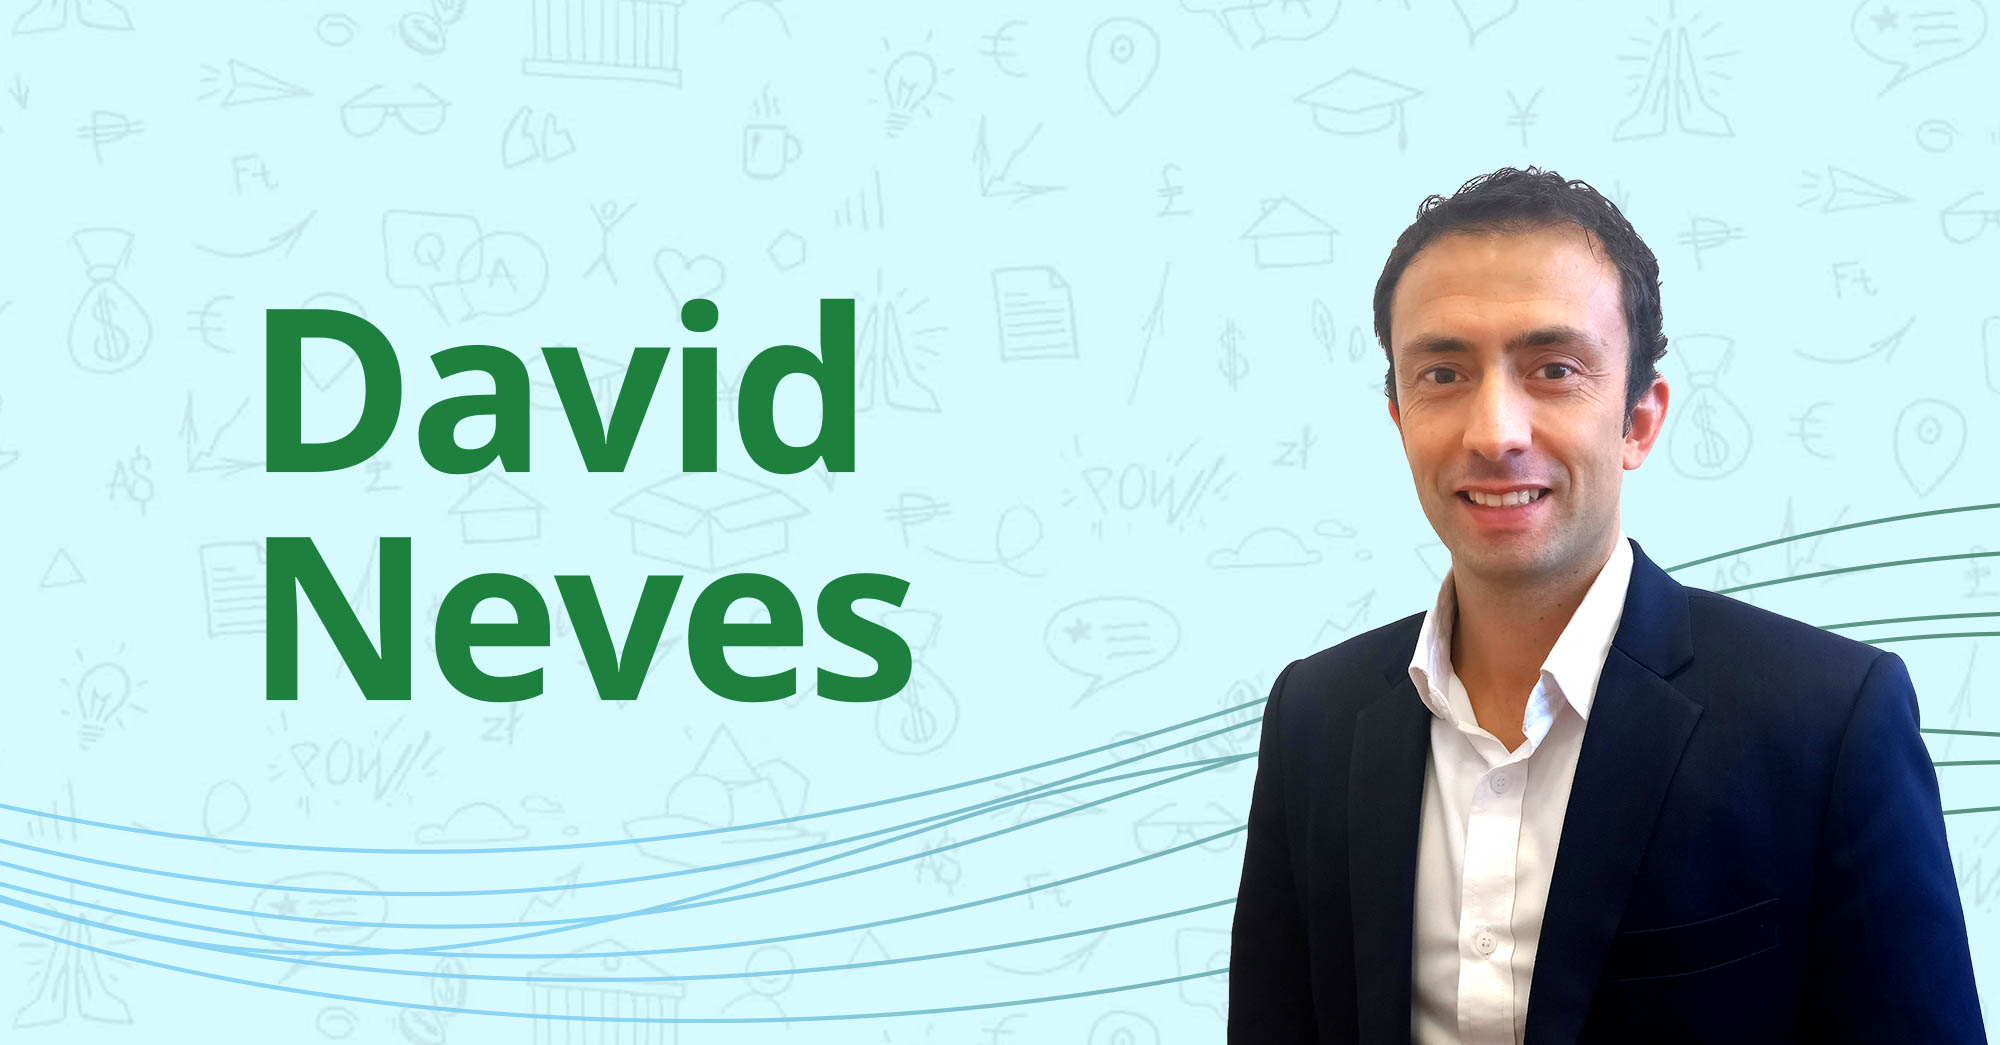 David Neves appointed Business Development Director, Southern Europe